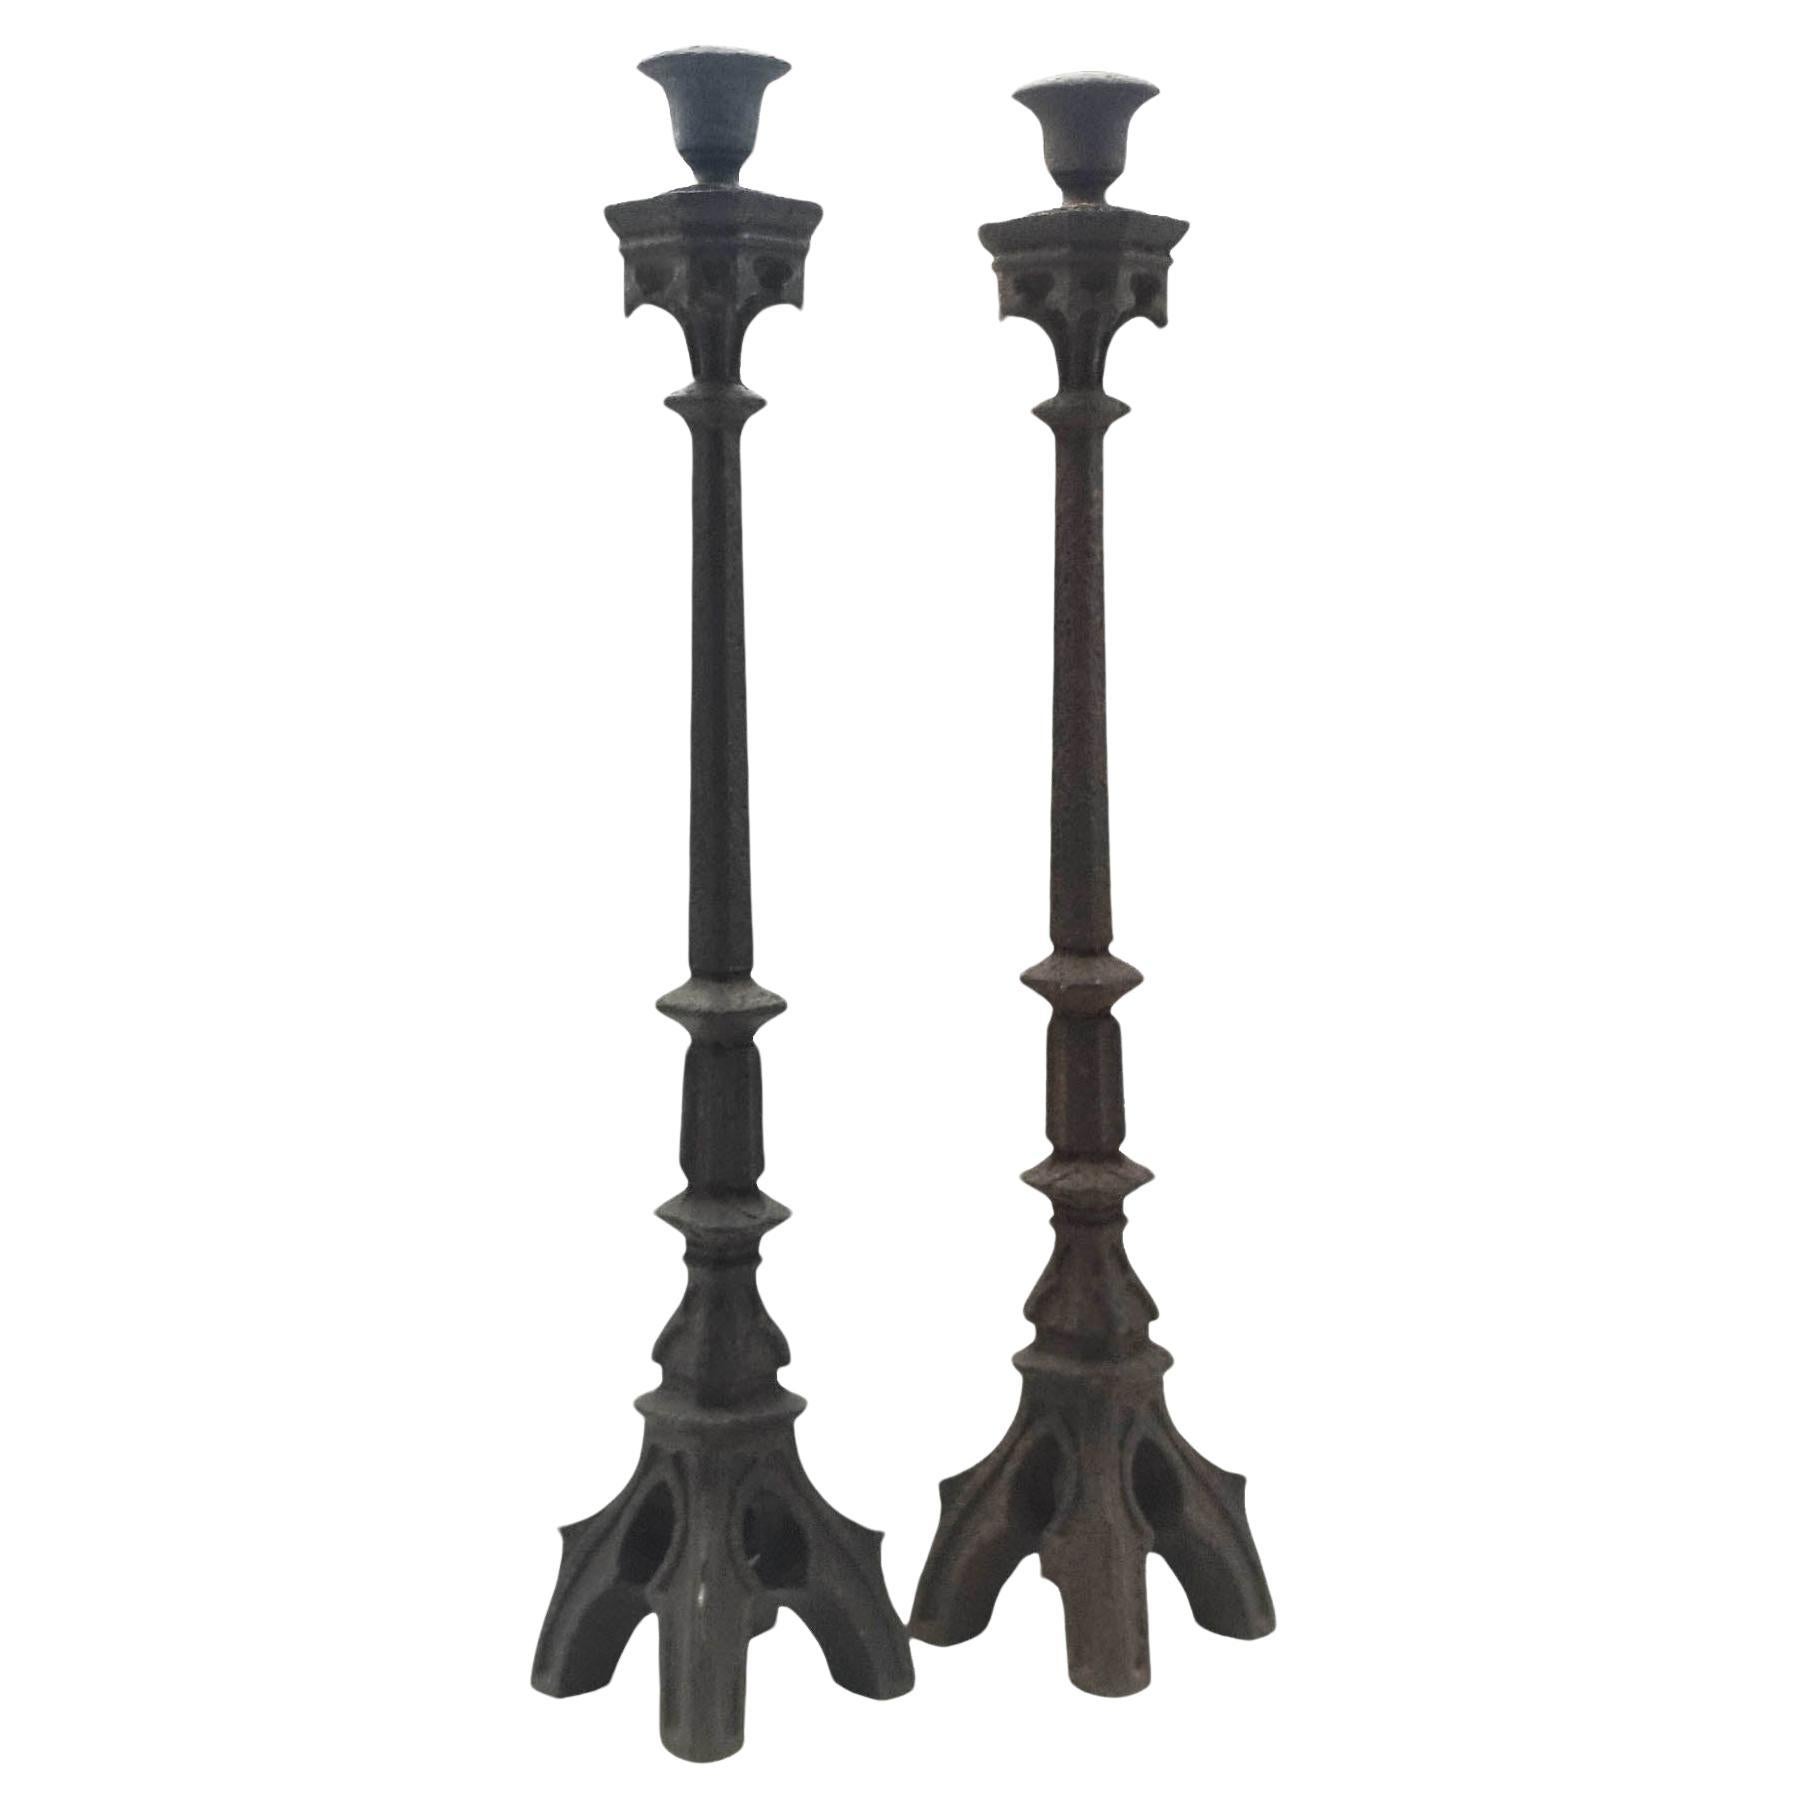 Pair of Neo-Gothic Iron Altar Candlesticks, Italy, 19th century For Sale